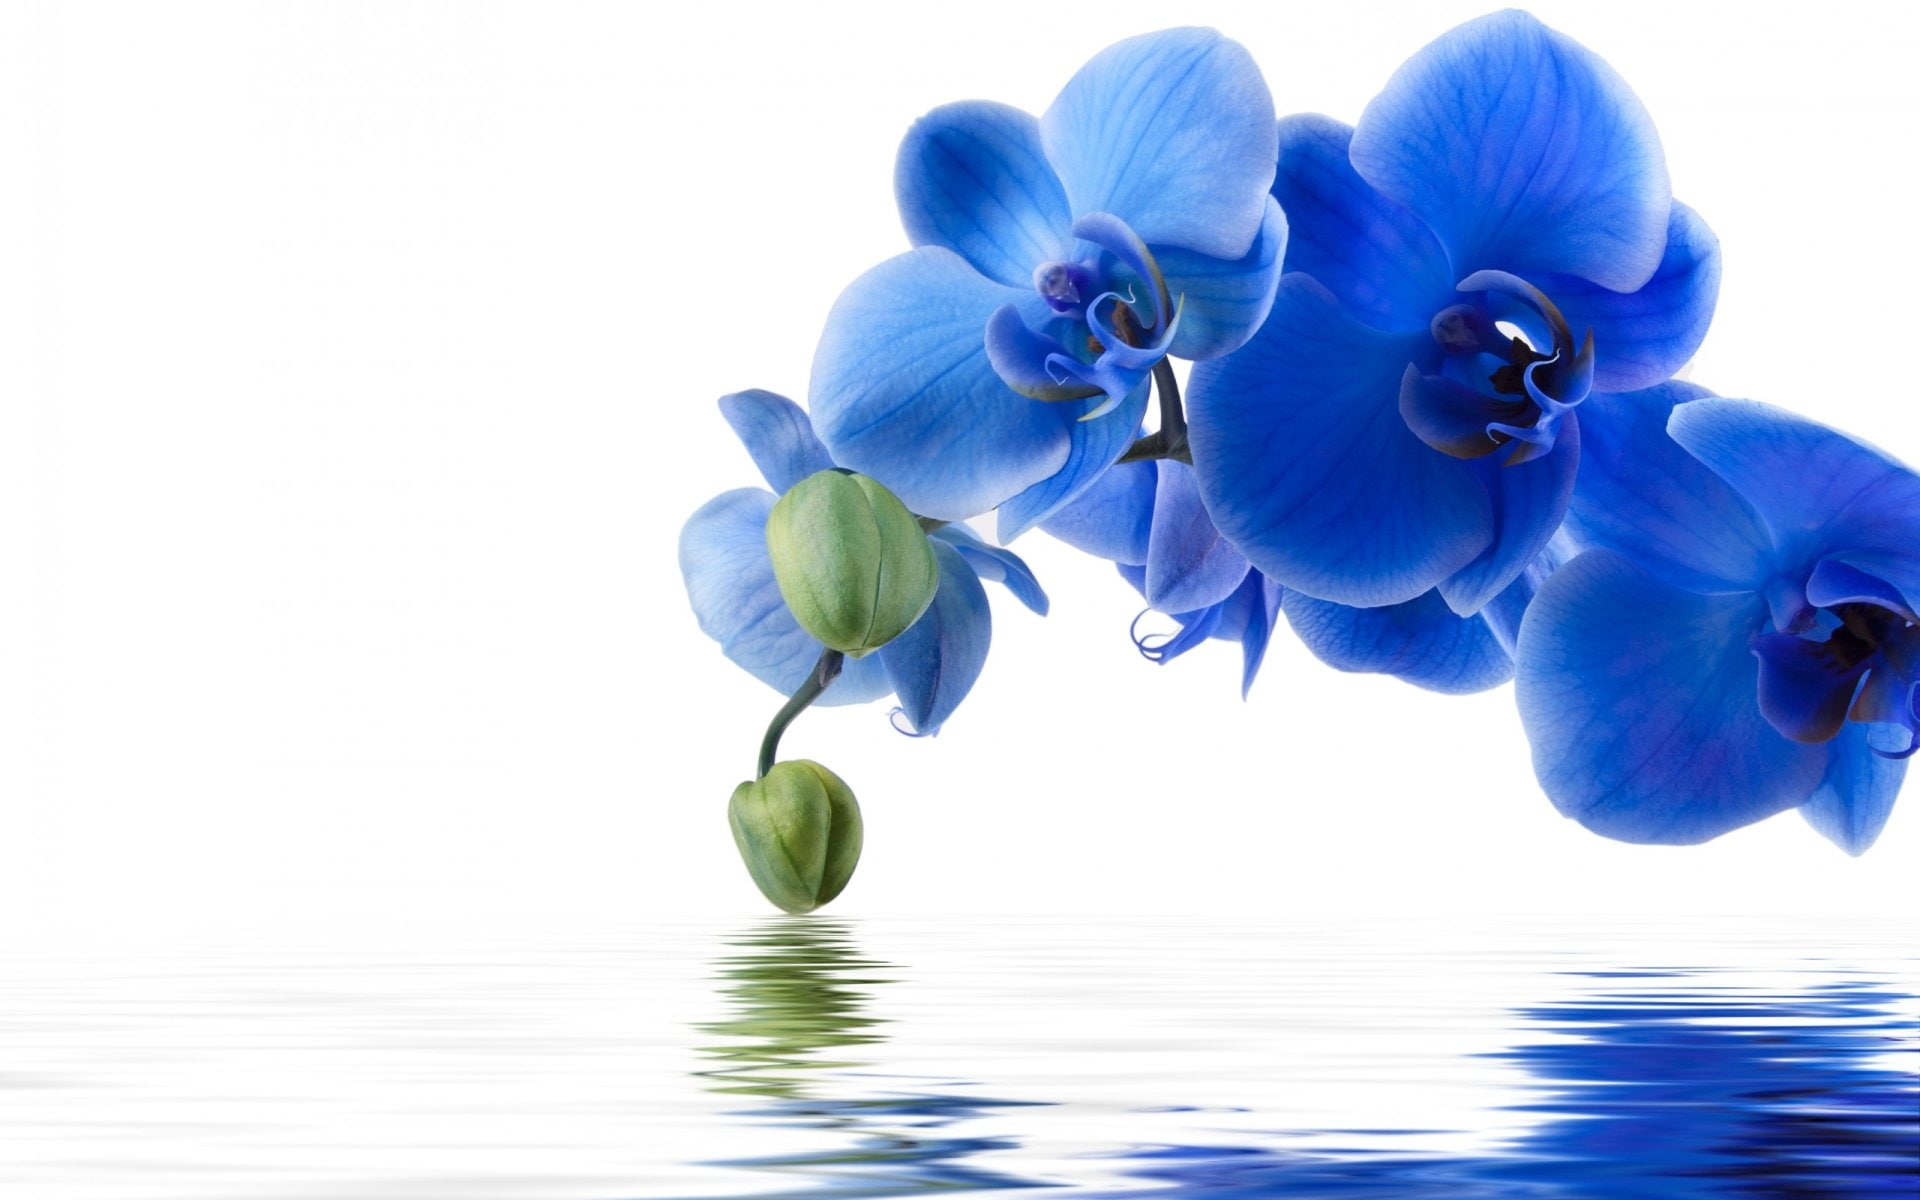 Flowers, Orchid, Blue Flower, Reflection